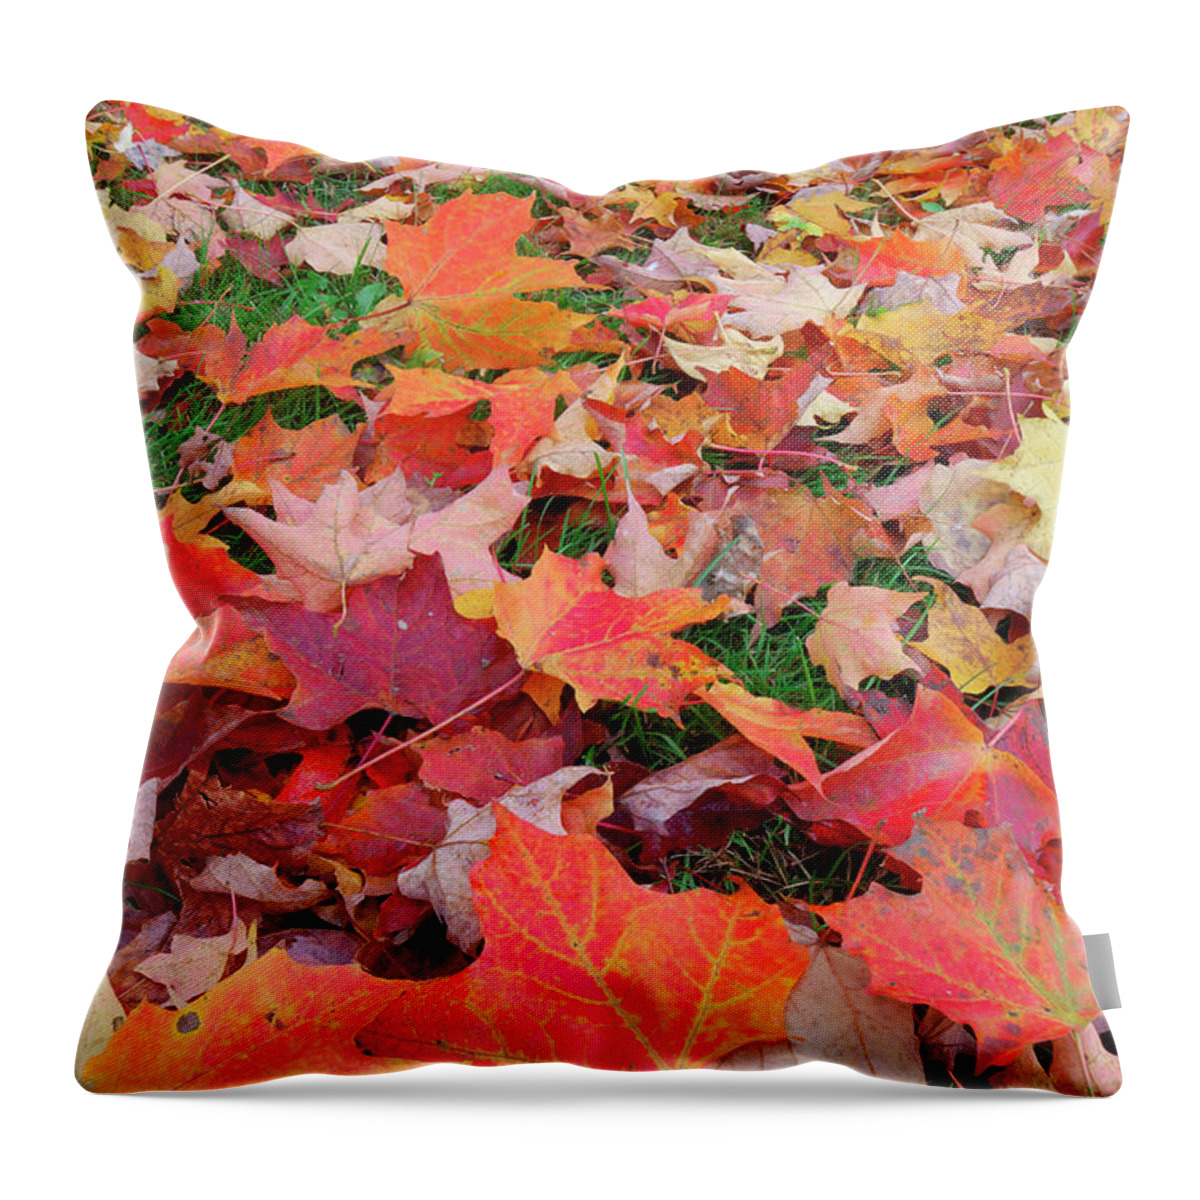 Grass Throw Pillow featuring the photograph Maple Acer Sp. Leaves On The Ground In by Martin Ruegner